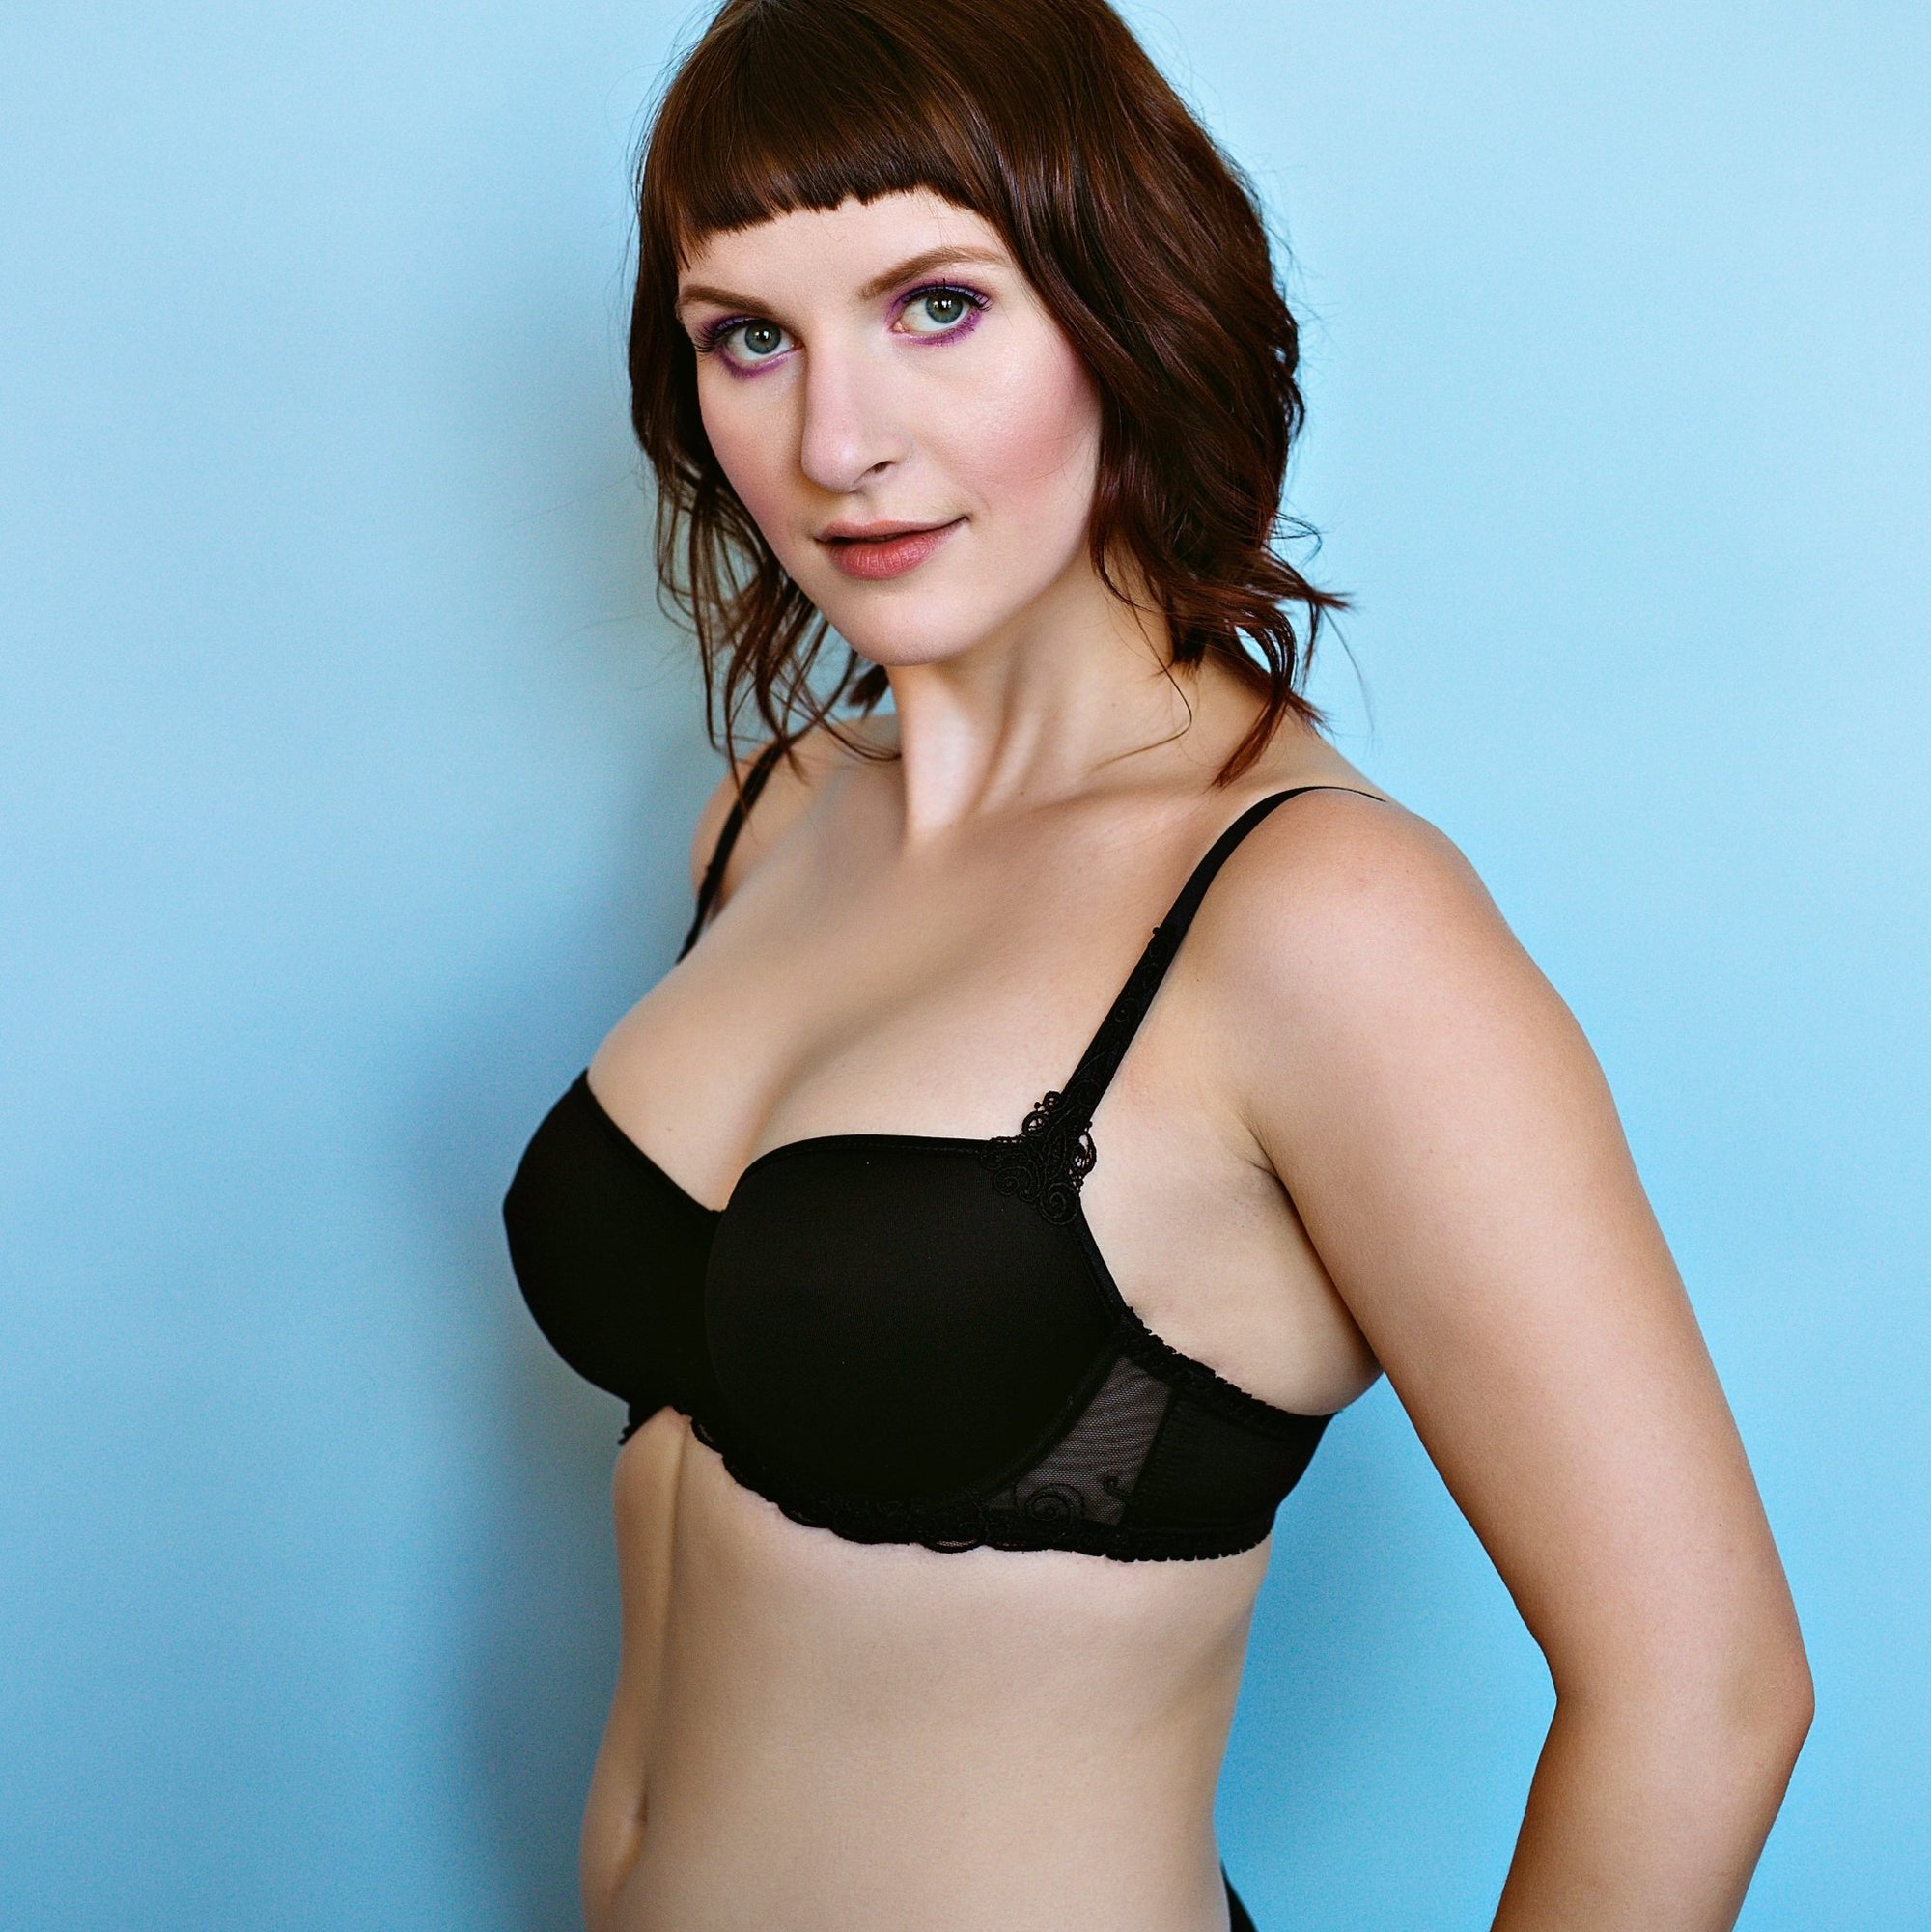 Shop Bras Made in Canada, Cup Sizes K to Z Bands 24+ DDDD+ Big Cup